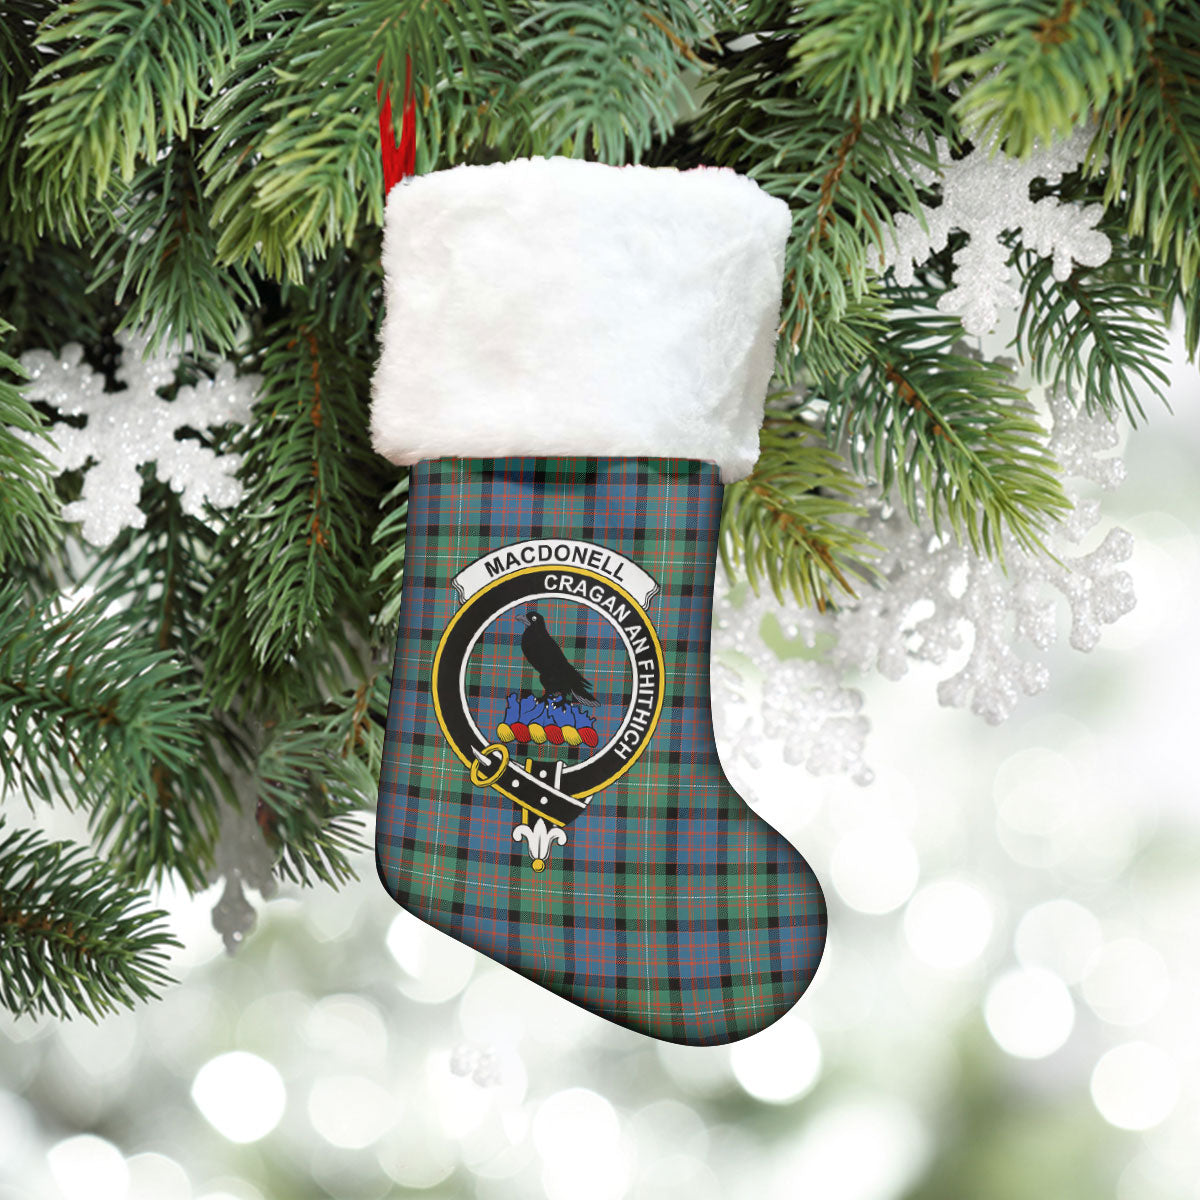 MacDonnell of Glengarry Ancient Tartan Crest Christmas Stocking